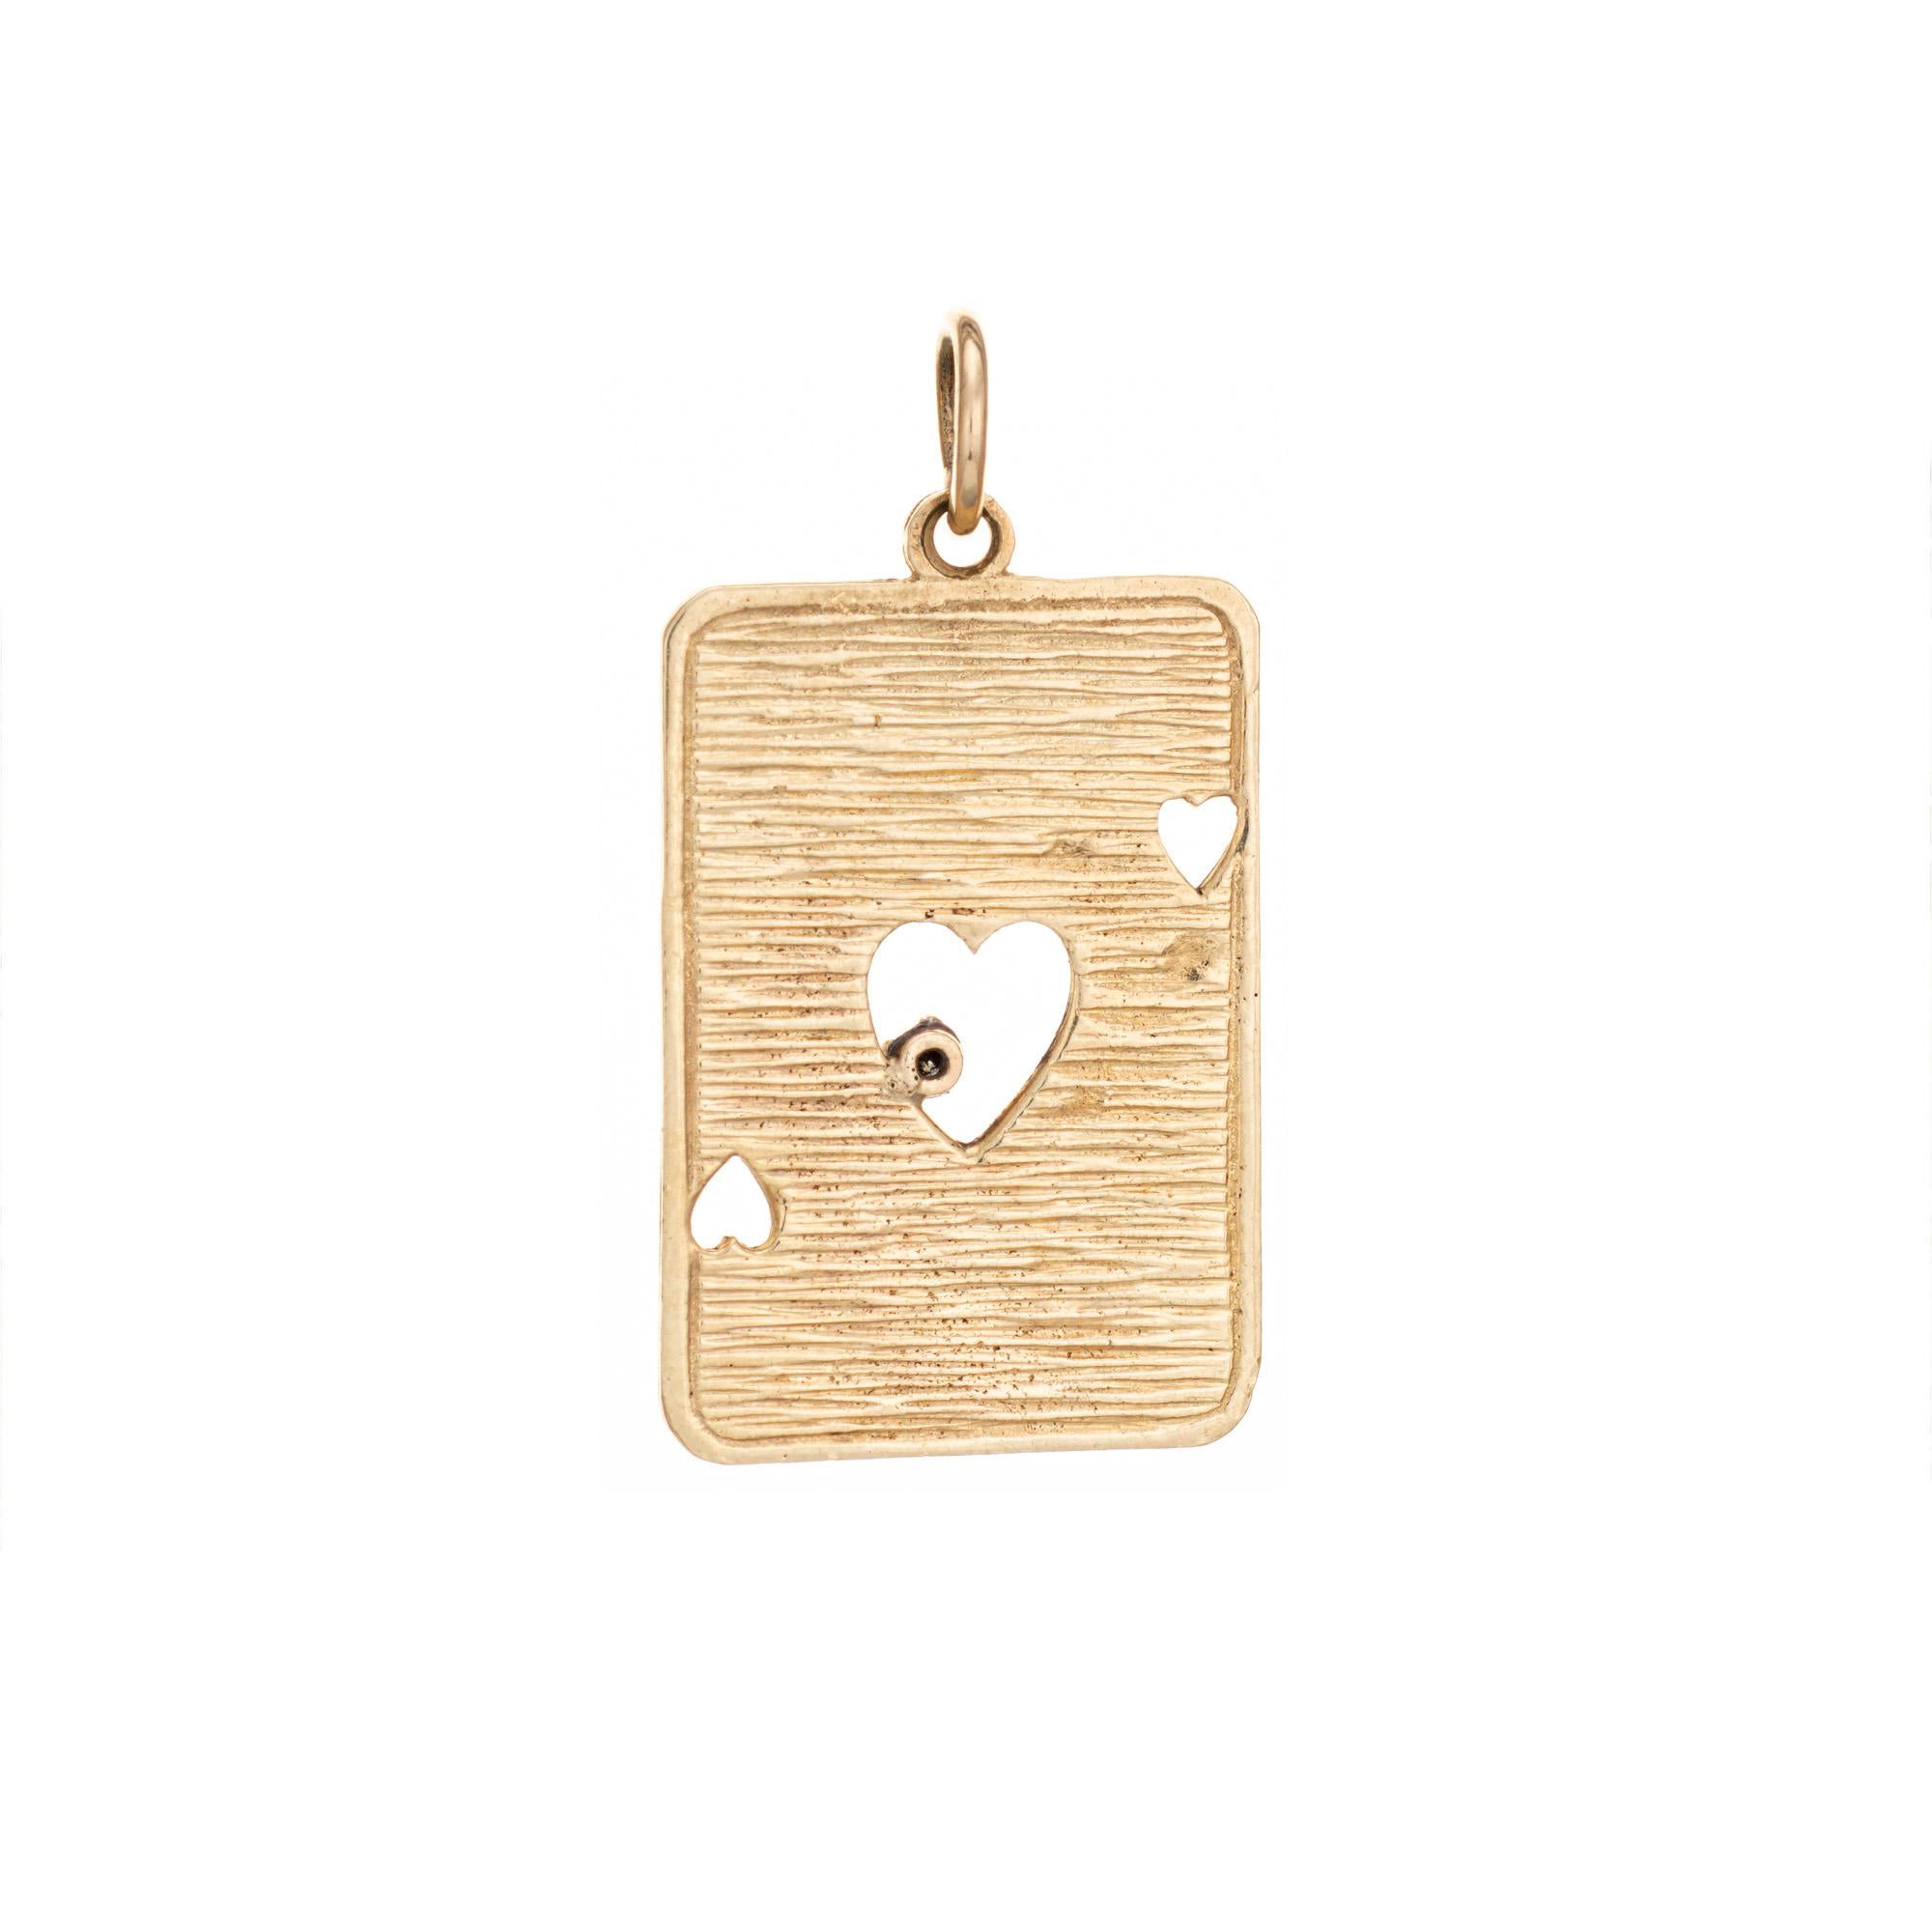 Finely detailed vintage Ace card charm crafted in 14k yellow gold (circa 1960s).  

One estimated 0.01 carat diamond is set into the charm 9estimated at H-I color and I1 clarity).

The Ace of cards is set with a diamond for good luck and three cut